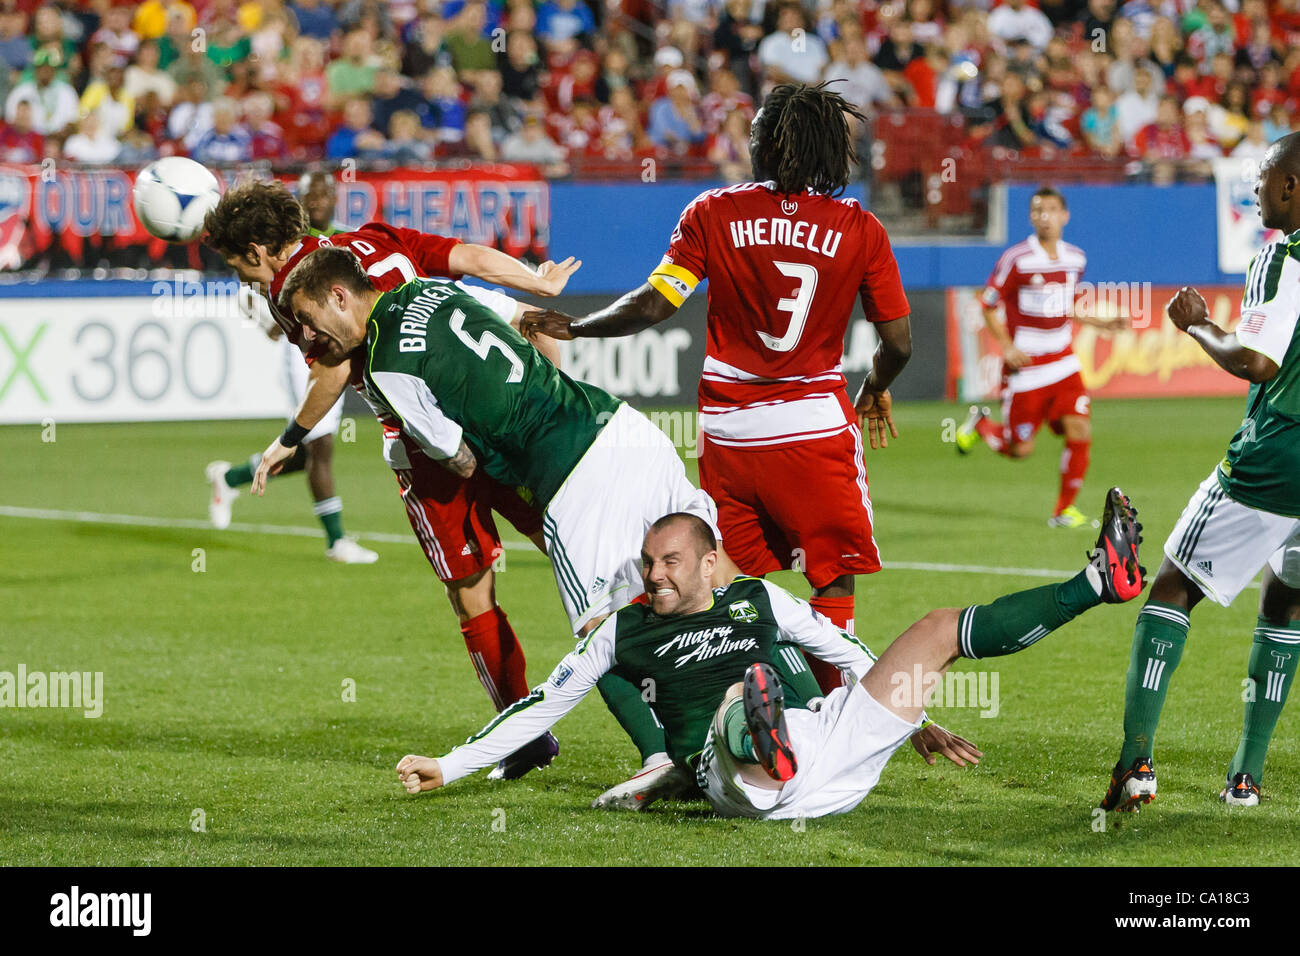 March 17, 2012 - Frisco, Texas, US - A scramble for a header by FC Dallas defenders Zach Loyd (17), Ugo Ihemelu (3) and Portland Timbers defender Eric Brunner (5) and forward Kris Boyd (9) of Scotland during action between FC Dallas and Portland Timbers.  FC Dallas and Portland draw their match 1-1  Stock Photo